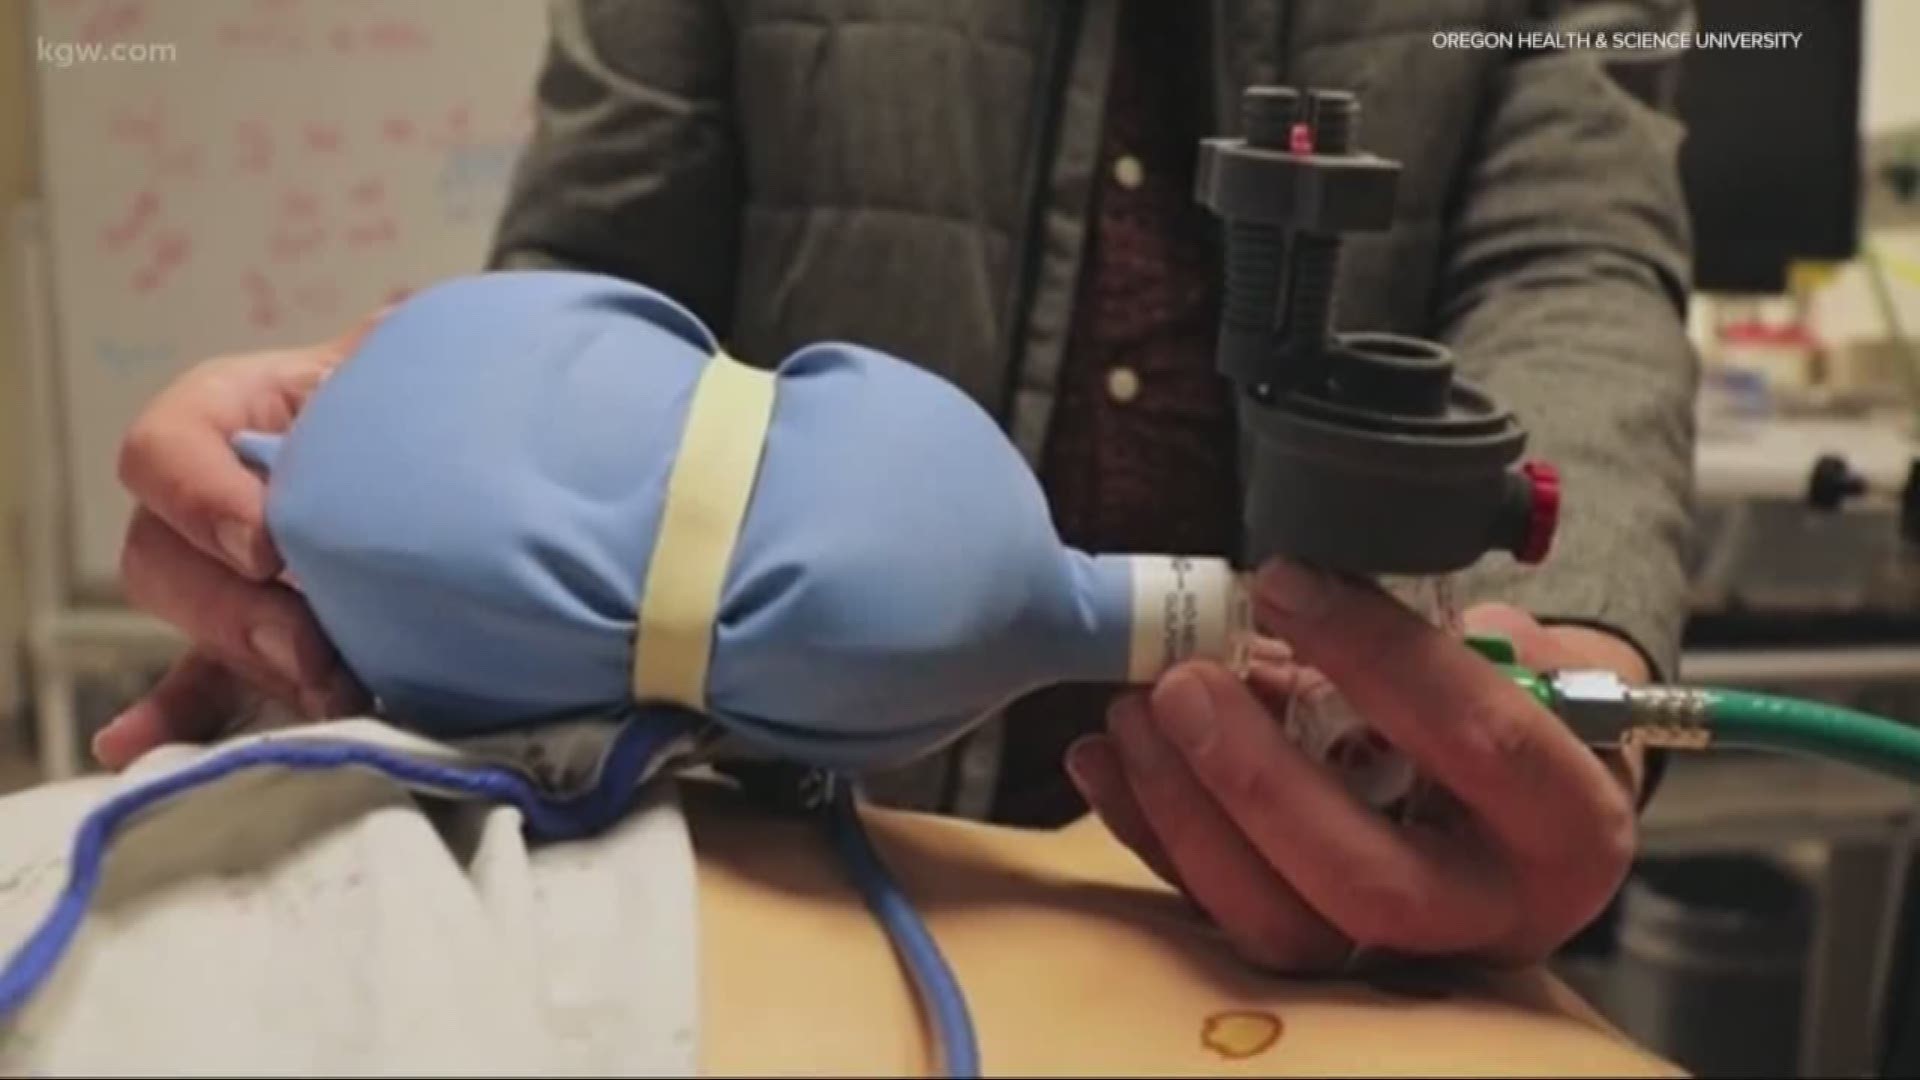 The ventilator can be printed anywhere in the world with just $10 worth of materials.